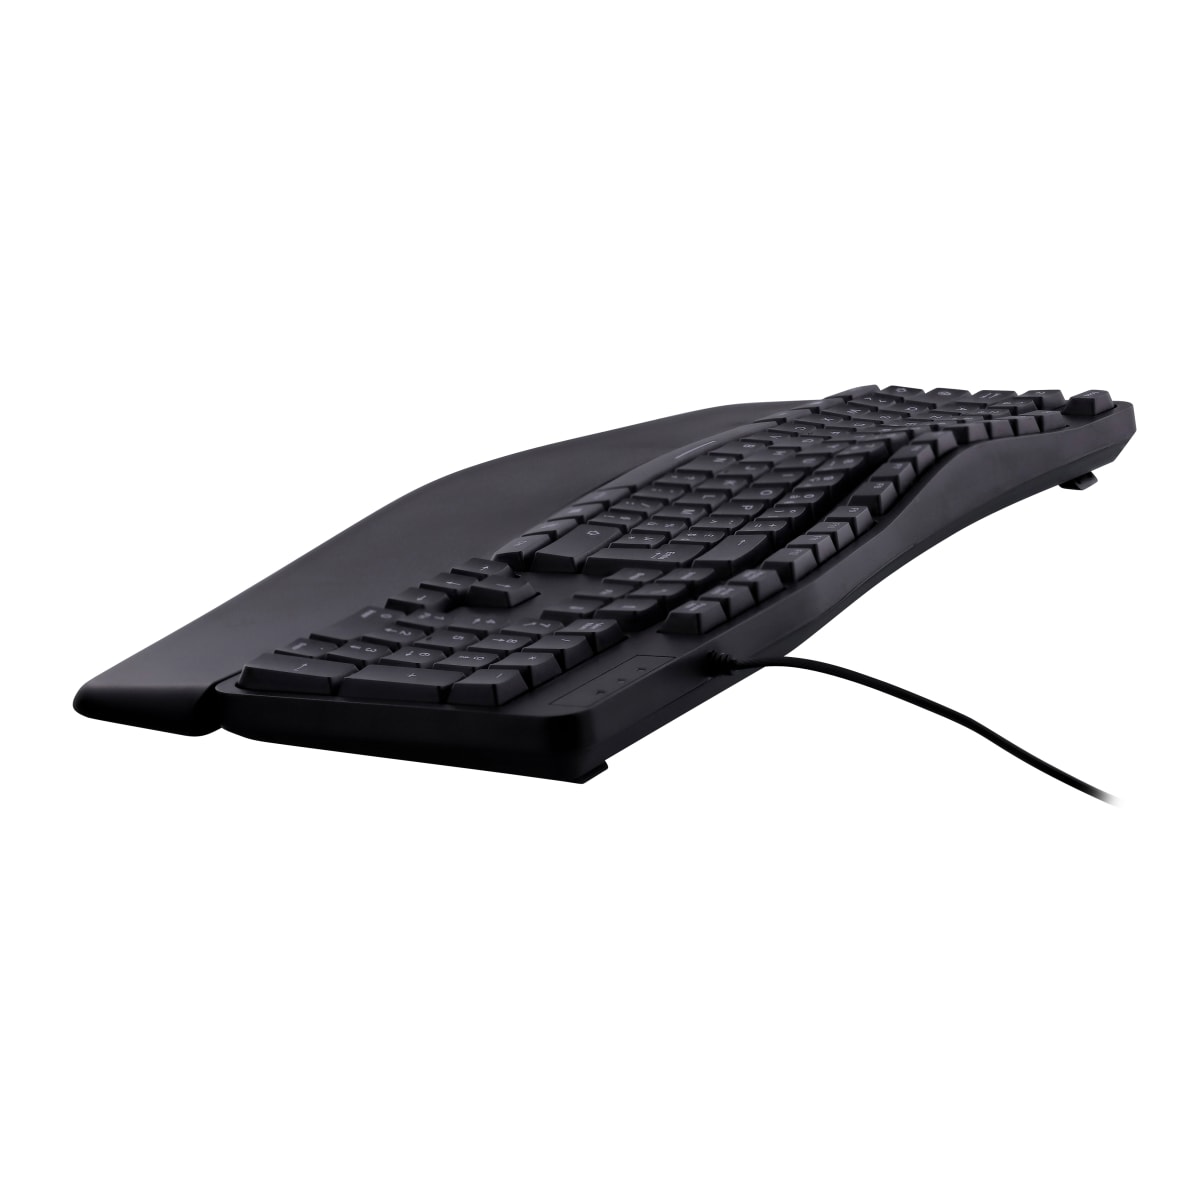 ERGONOMIC - Wired ergonomic keyboard with magnetic wrist rest - T'nB